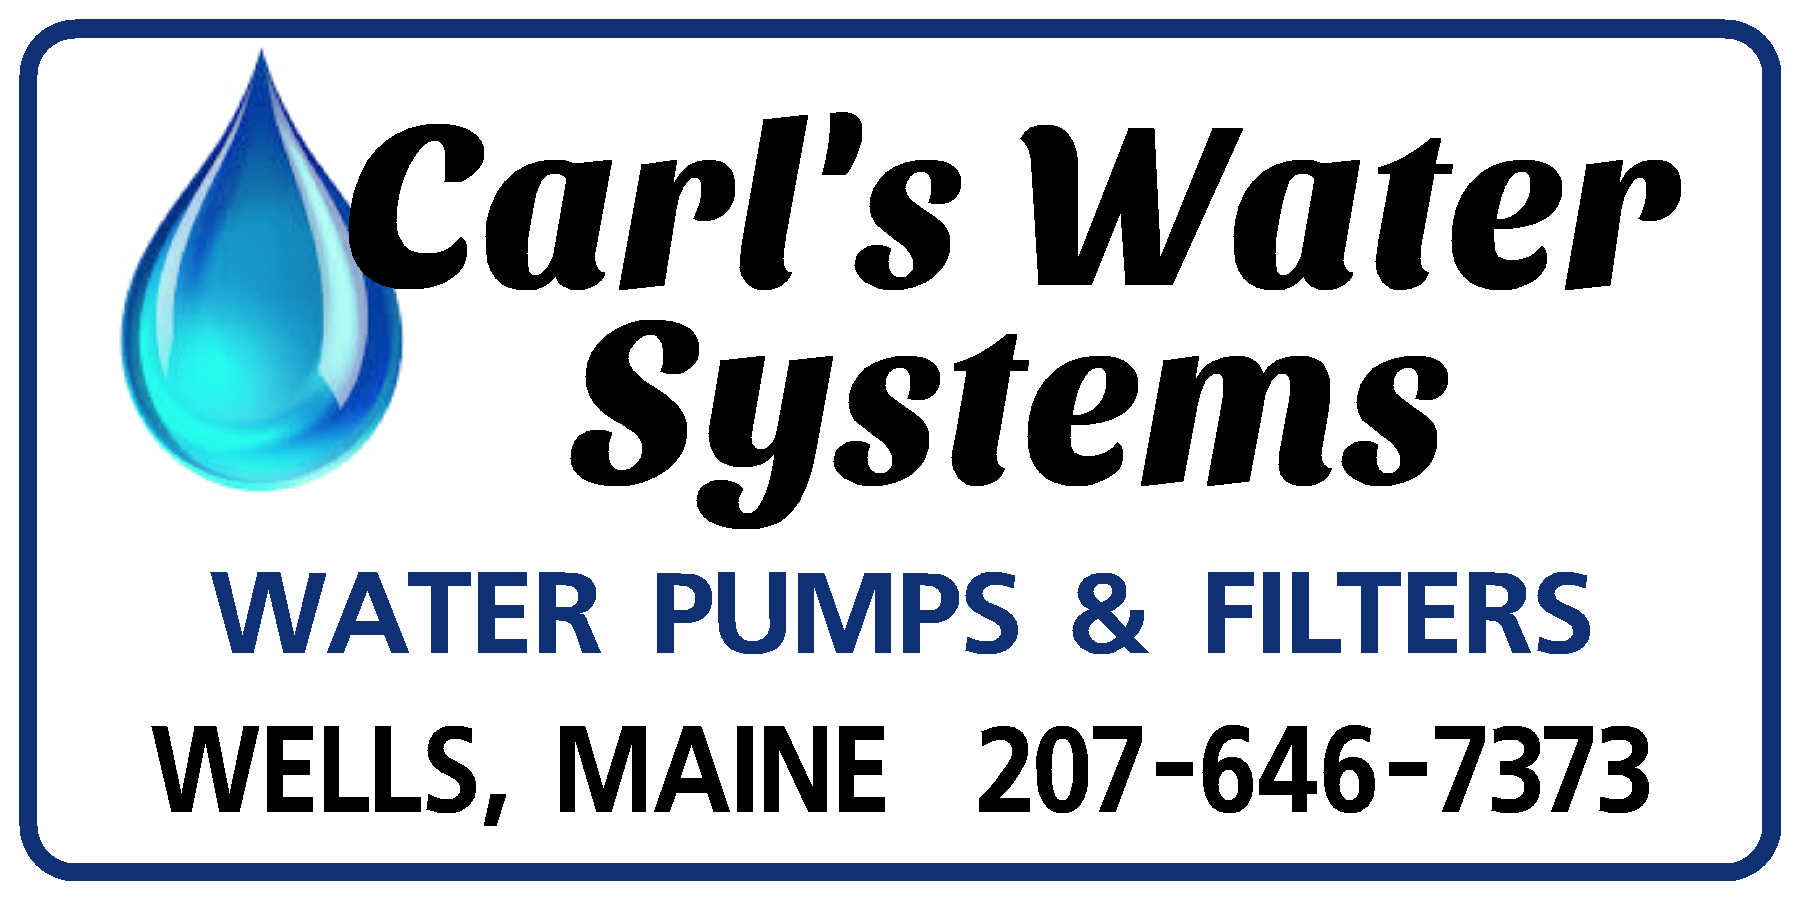 Carl's Water Systems